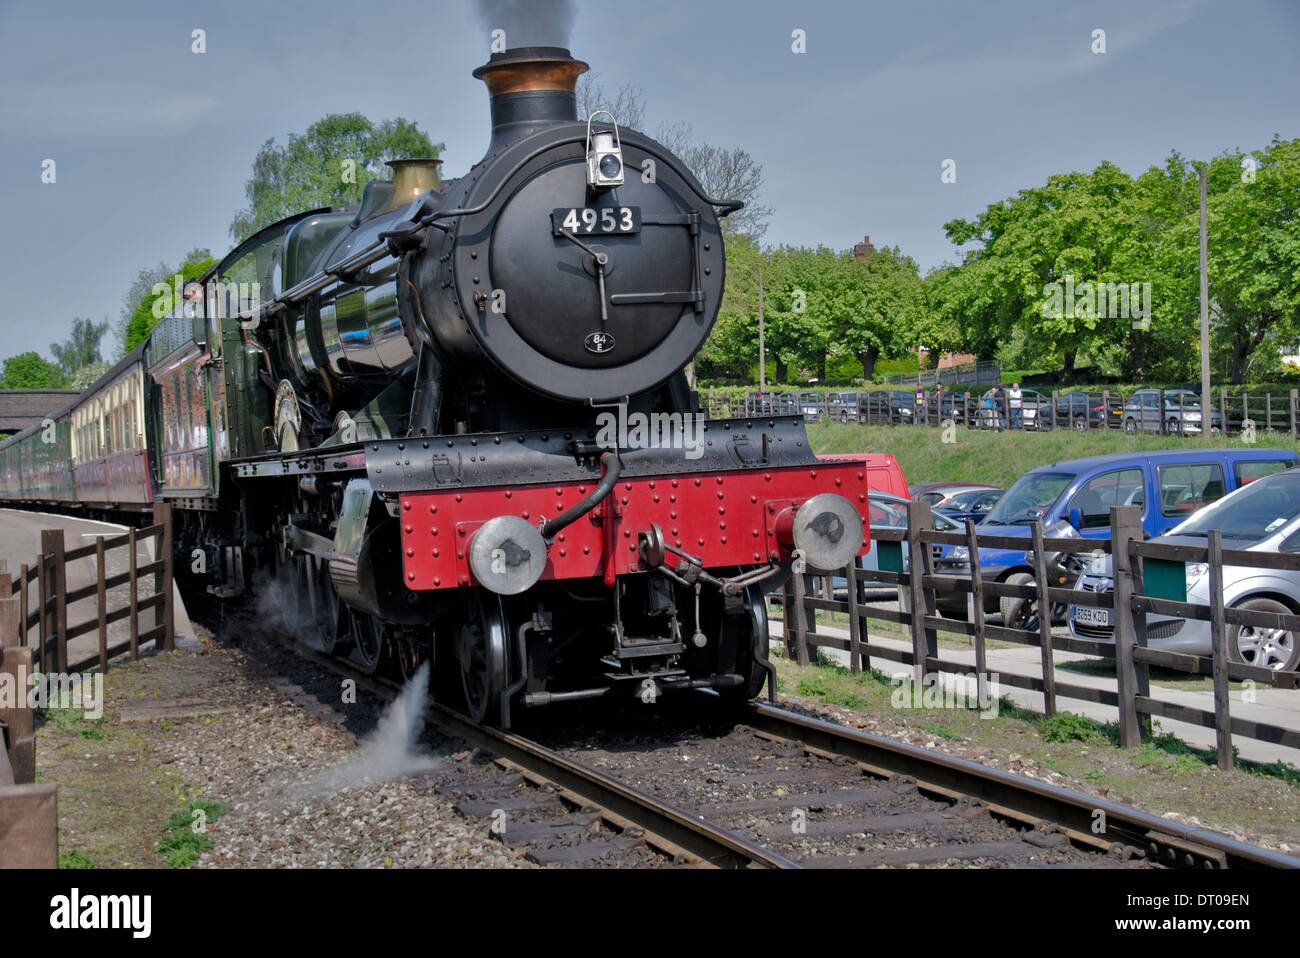 Preserved ex GWR locomotive 4953 Pitchford Hall pulls out of Rothley station on the Great Central Railway in Leicest Stock Photo